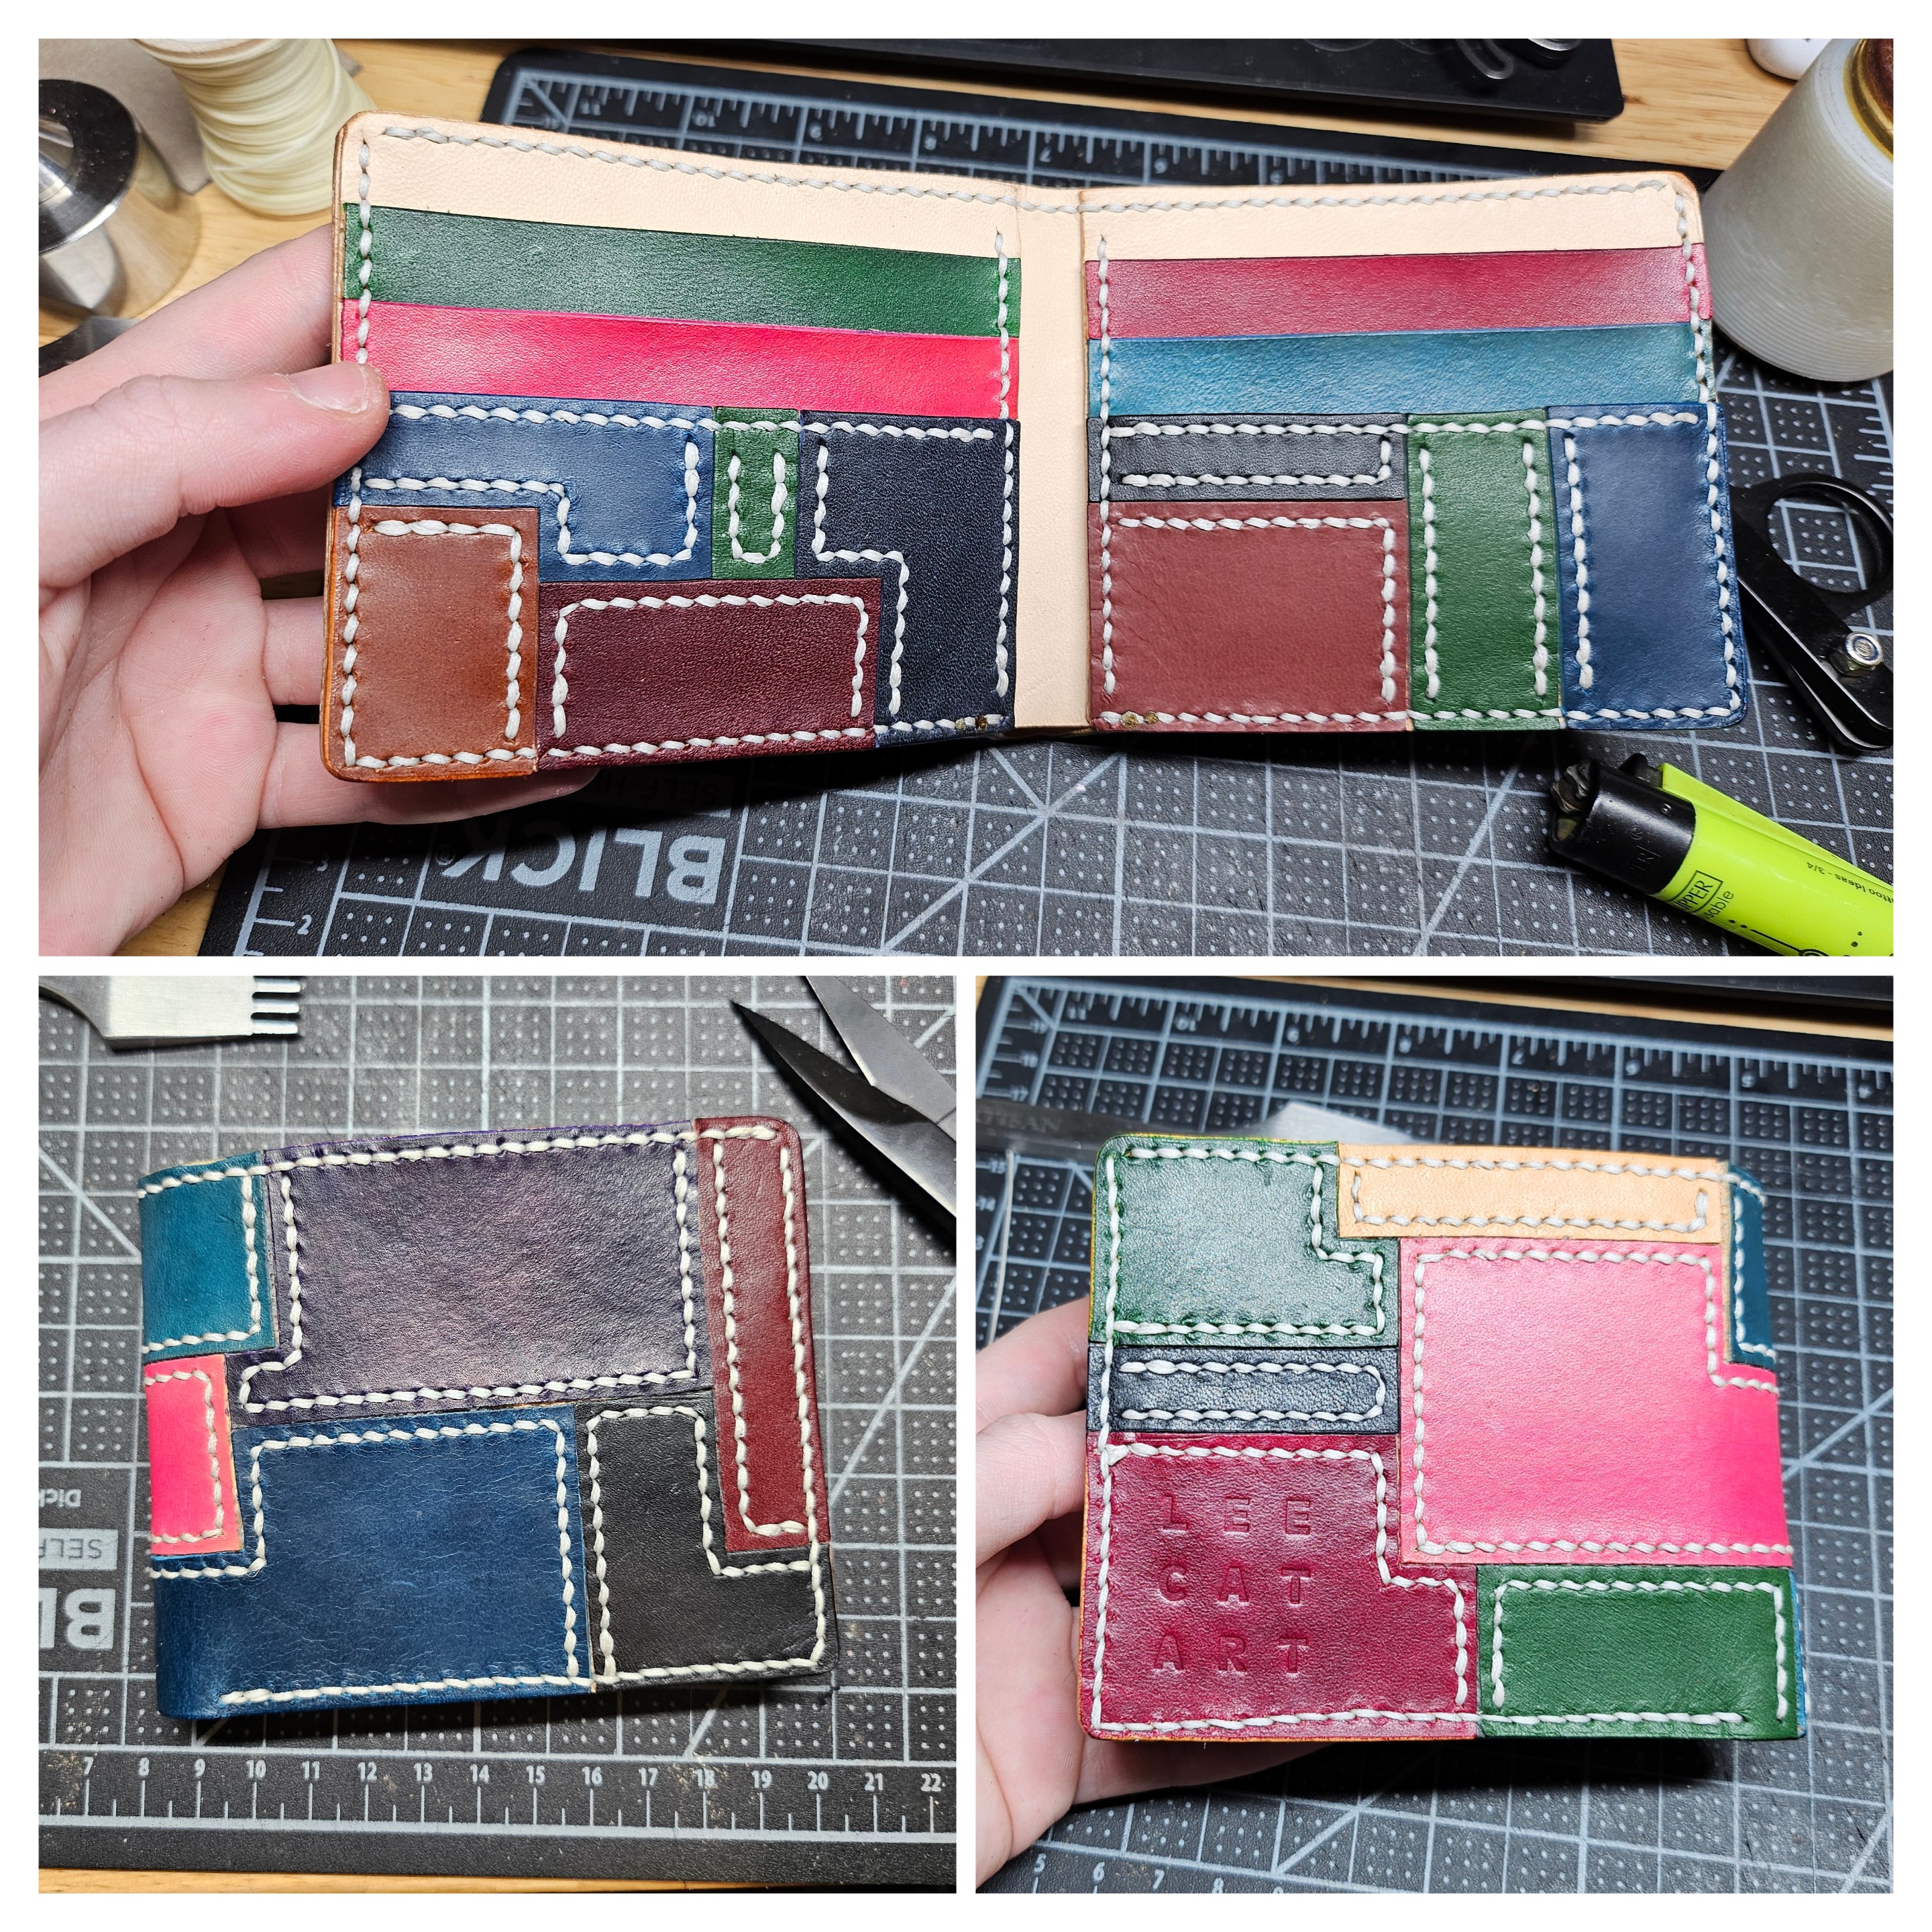 A collage showing a wallet in a patchwork style, with different colors of leather all stitched together to make up the exterior and the top interior pockets. Other pockets inside are dyed various colors.